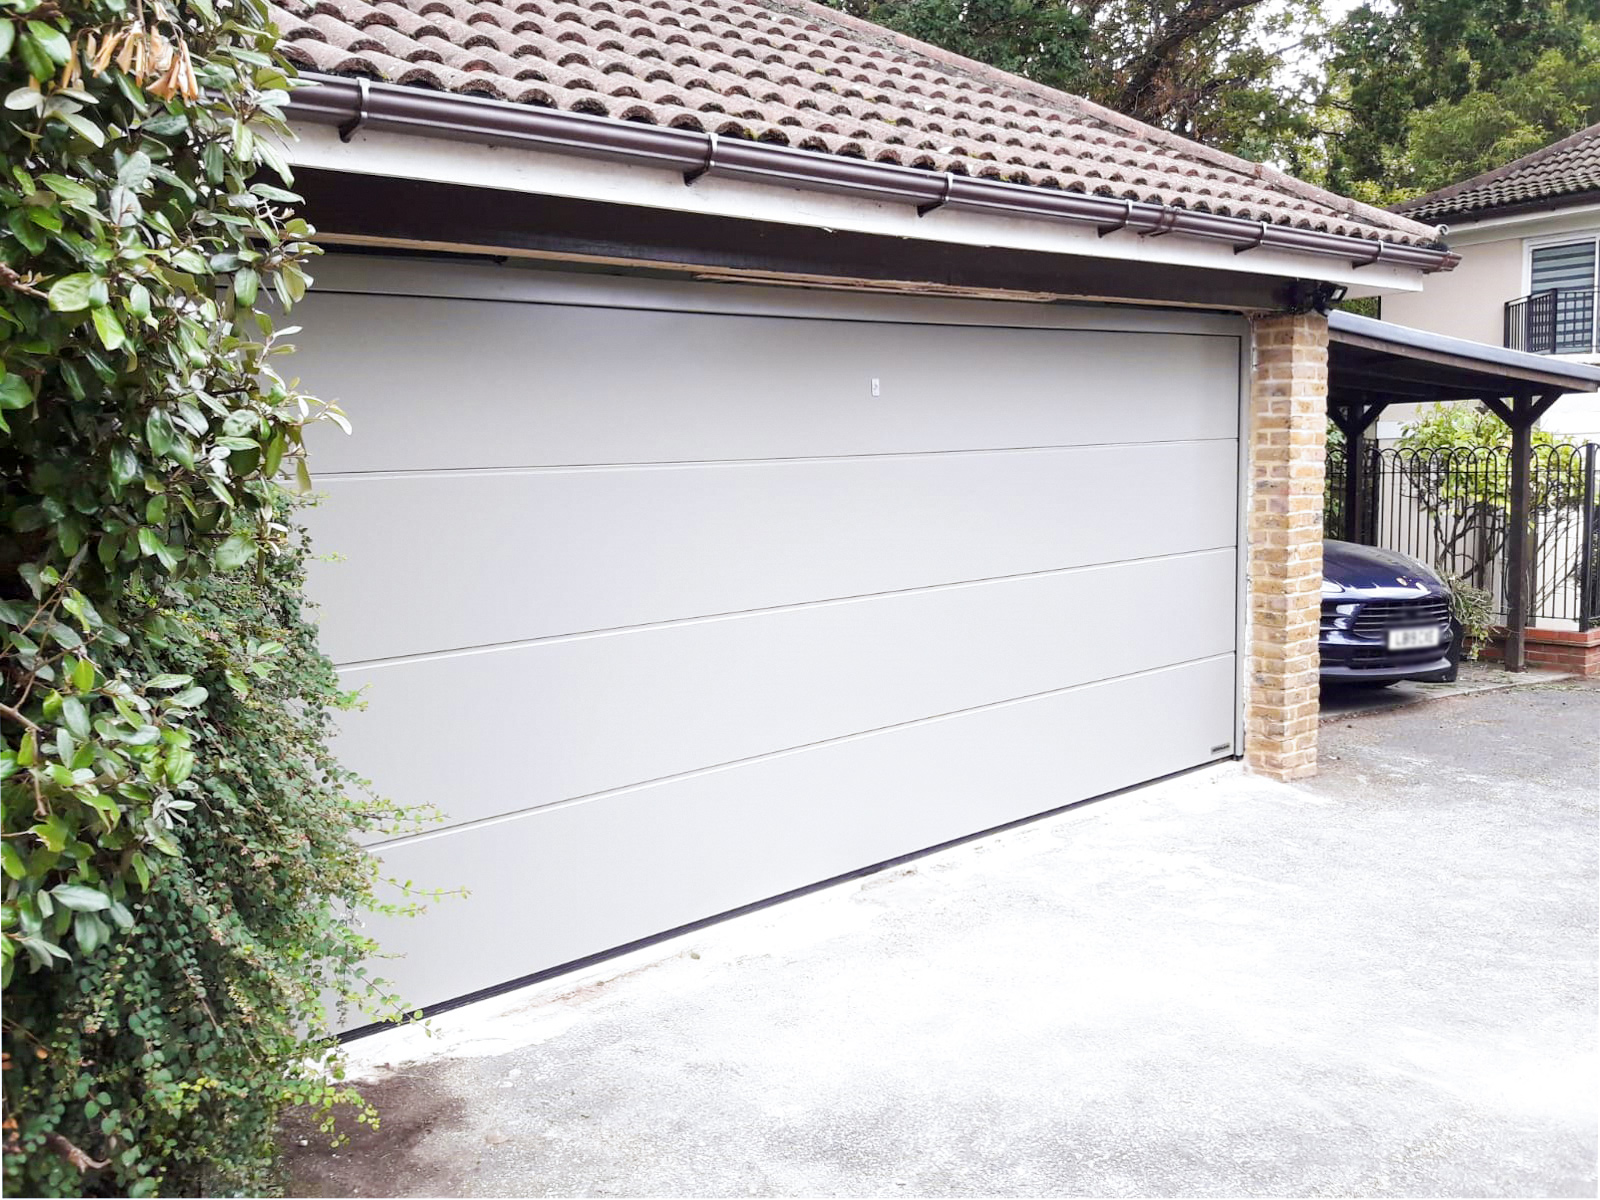 Hormann LPU42 L-Ribbed Insulated Double Sectional Garage Door Finished in Stone Grey